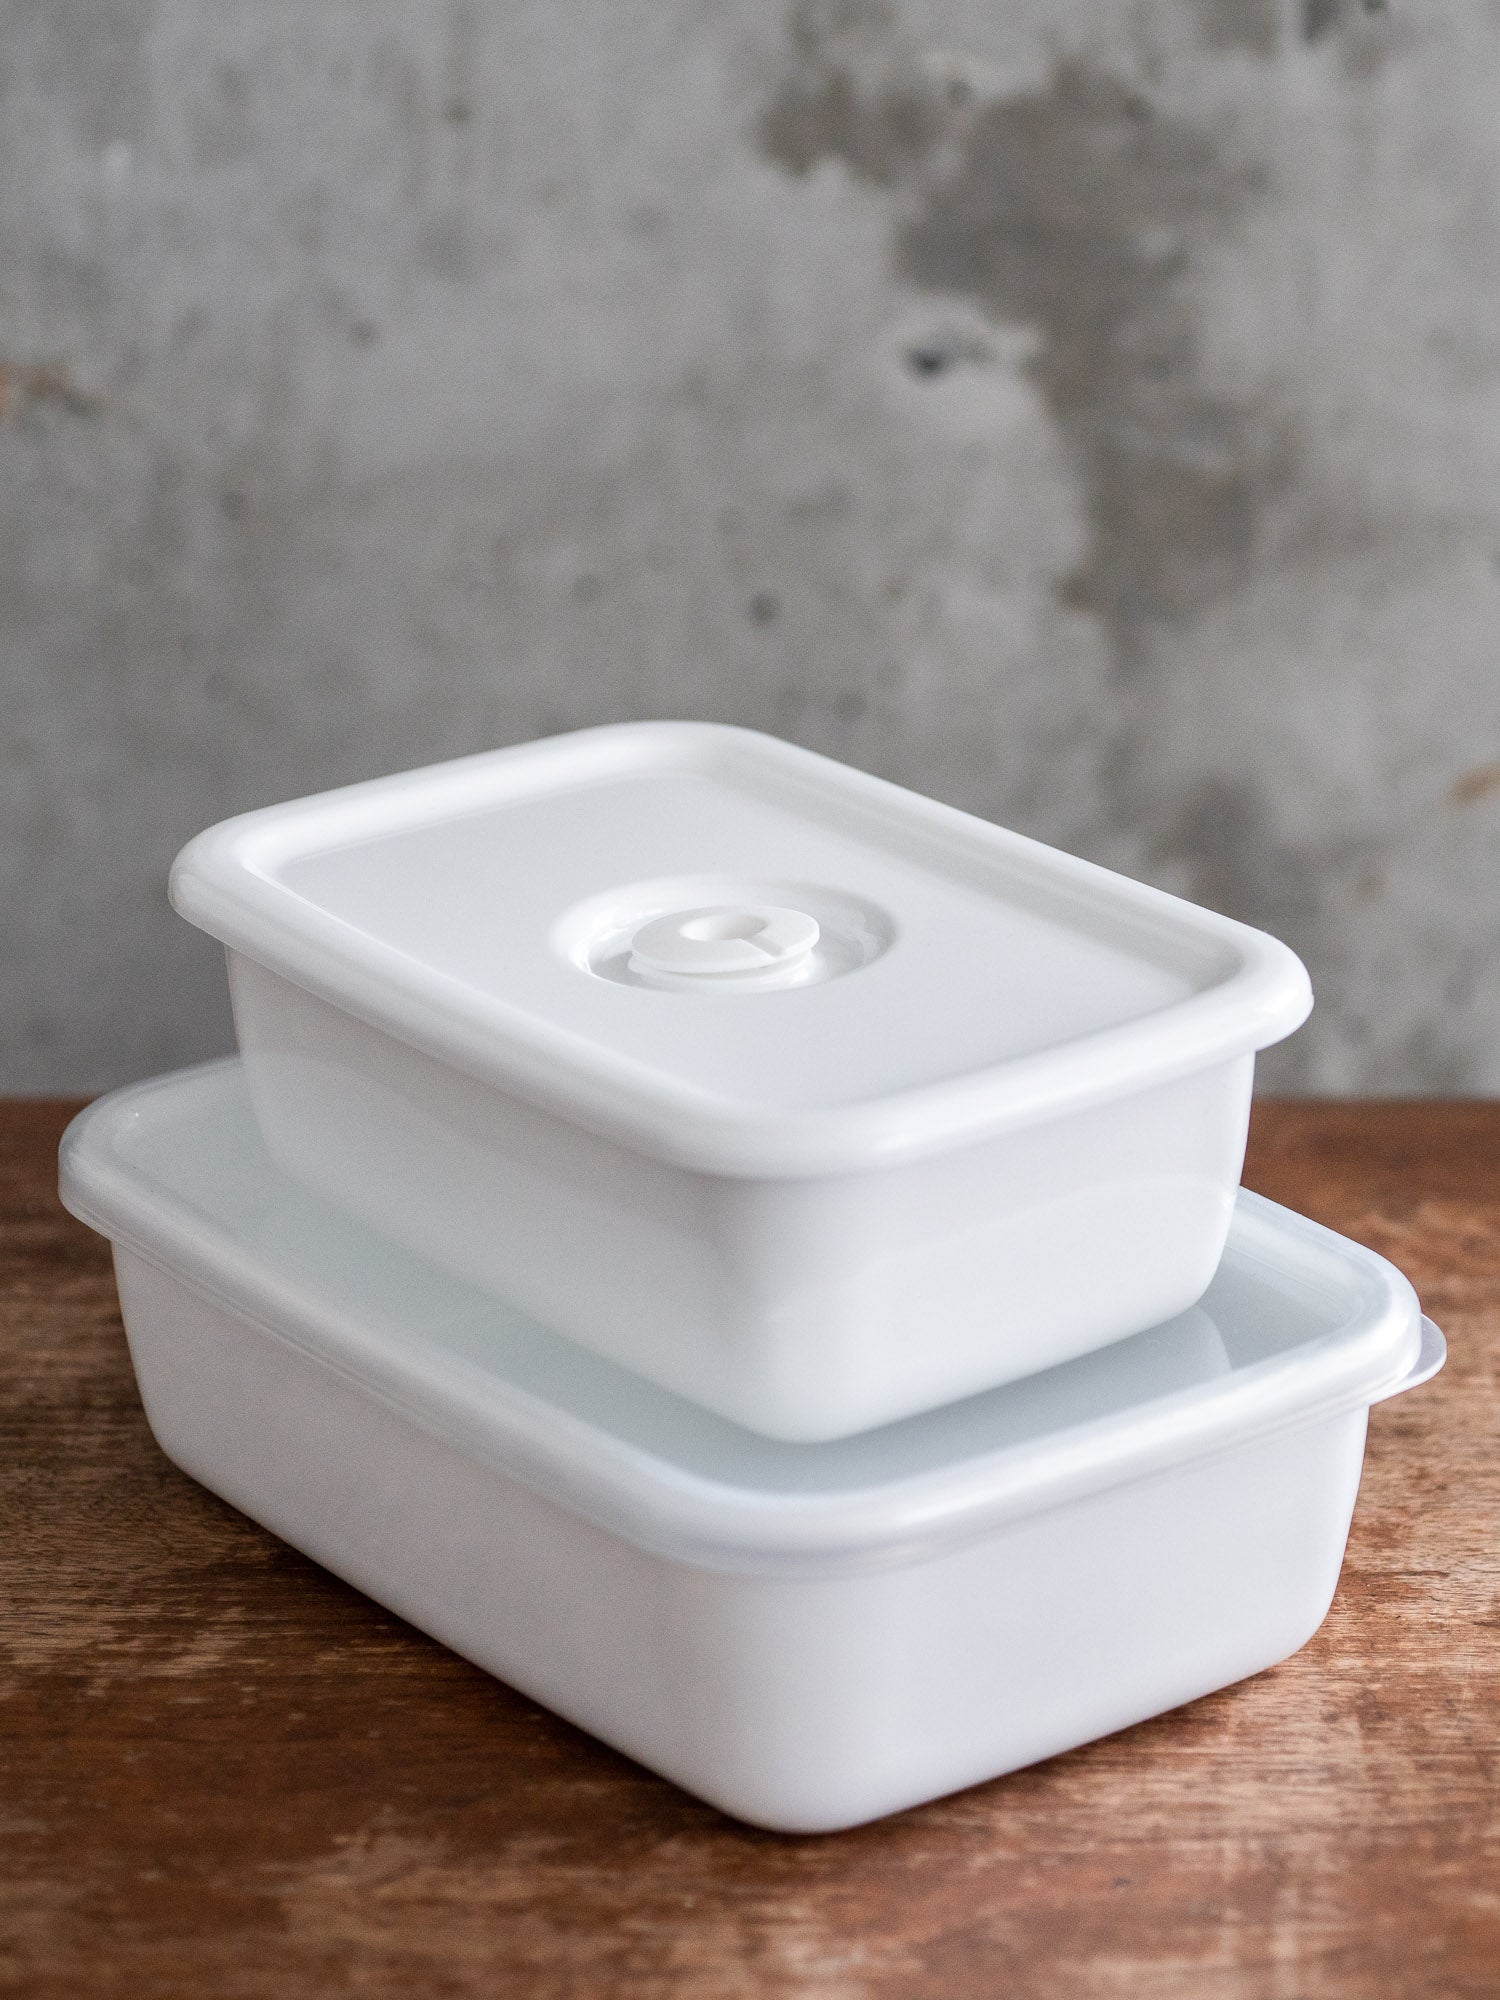 Noda Horo White Series Enamel Rectangle Shallow Food Containers